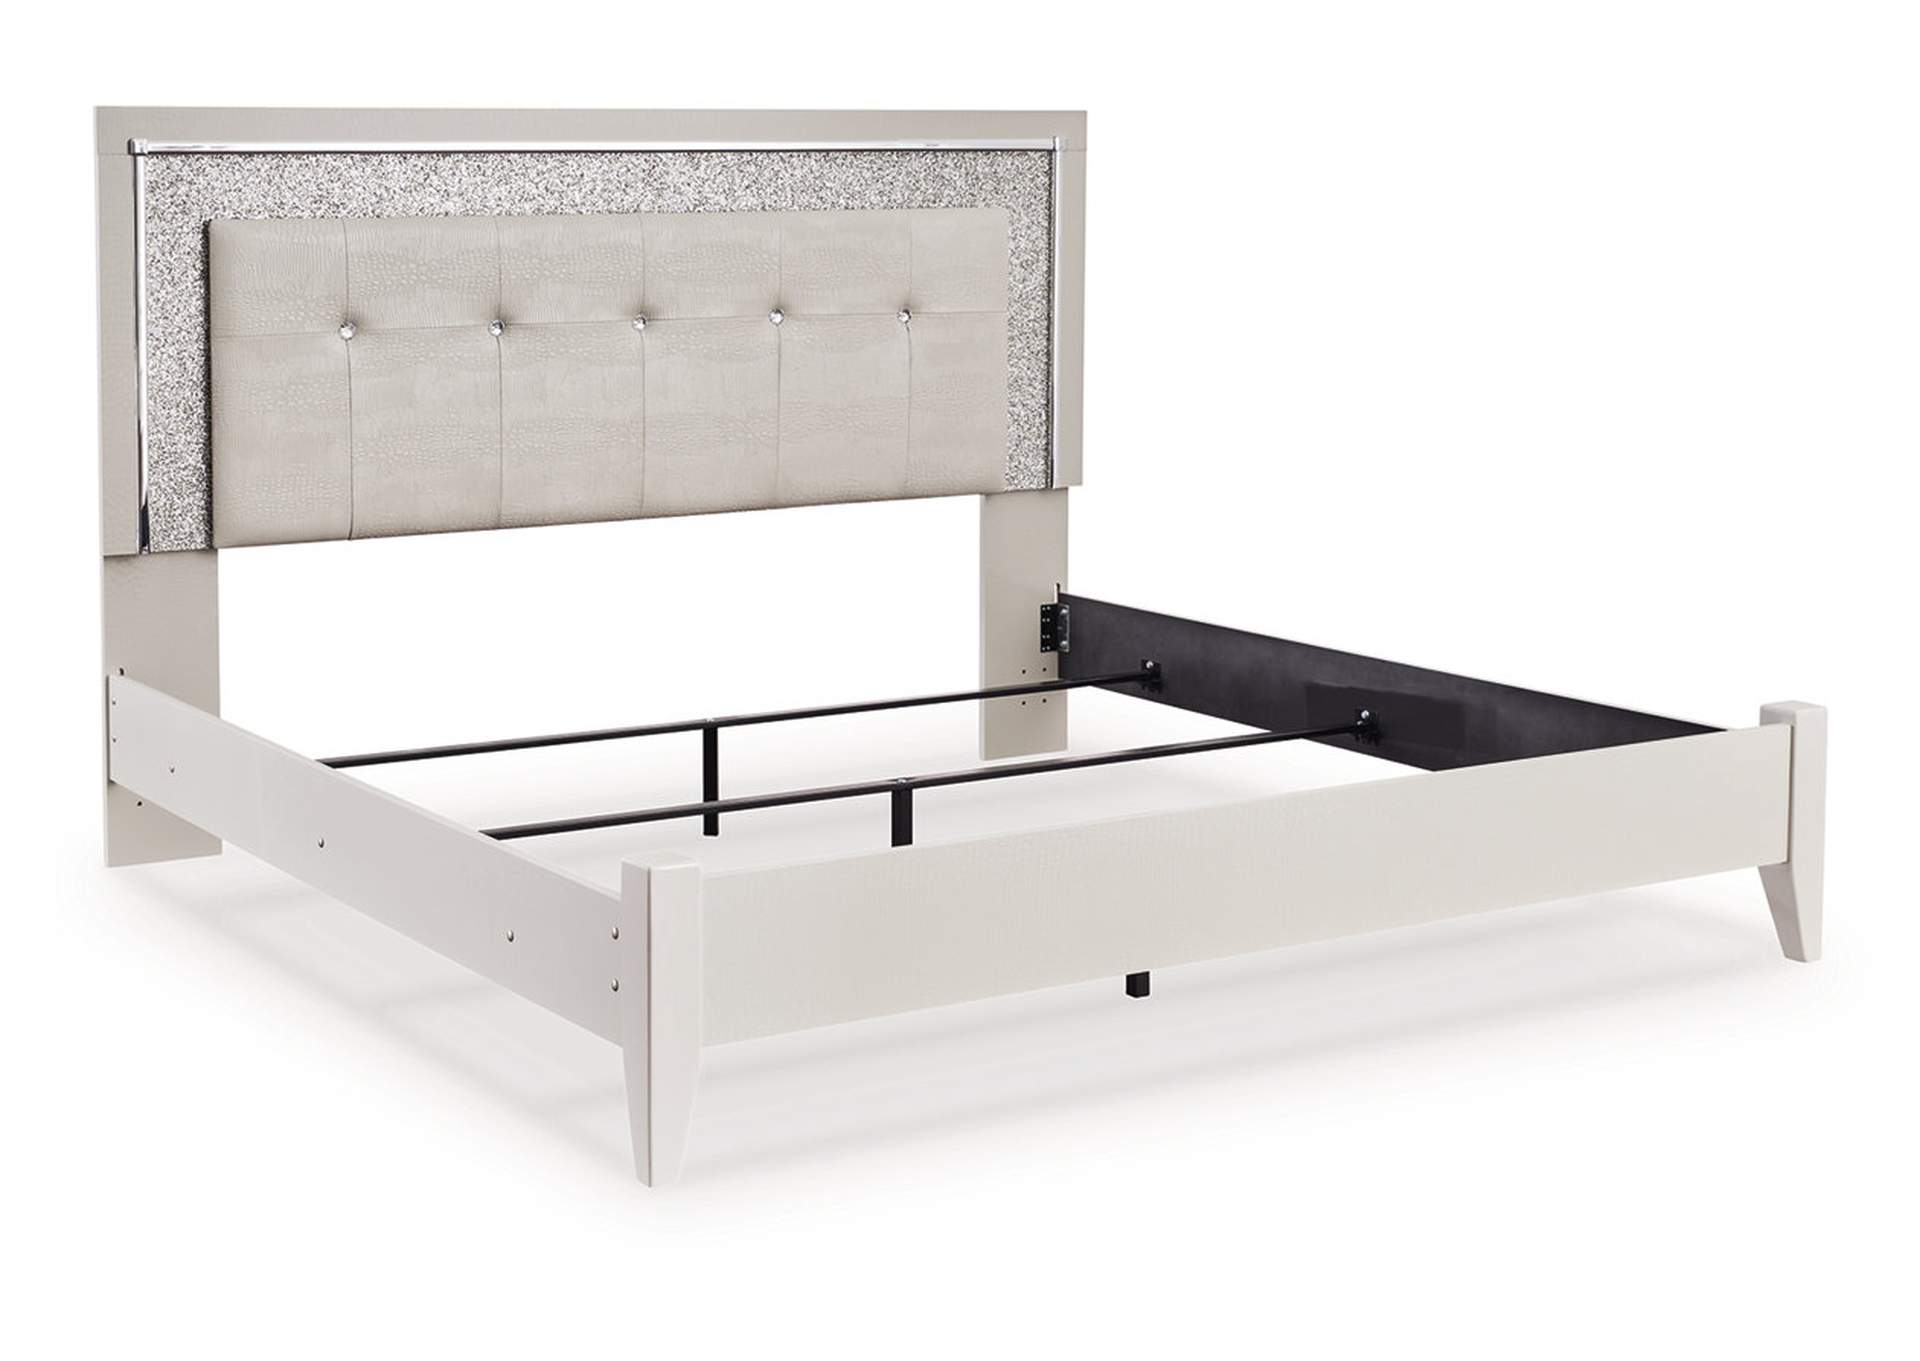 Zyniden King Upholstered Panel Bed,Signature Design By Ashley